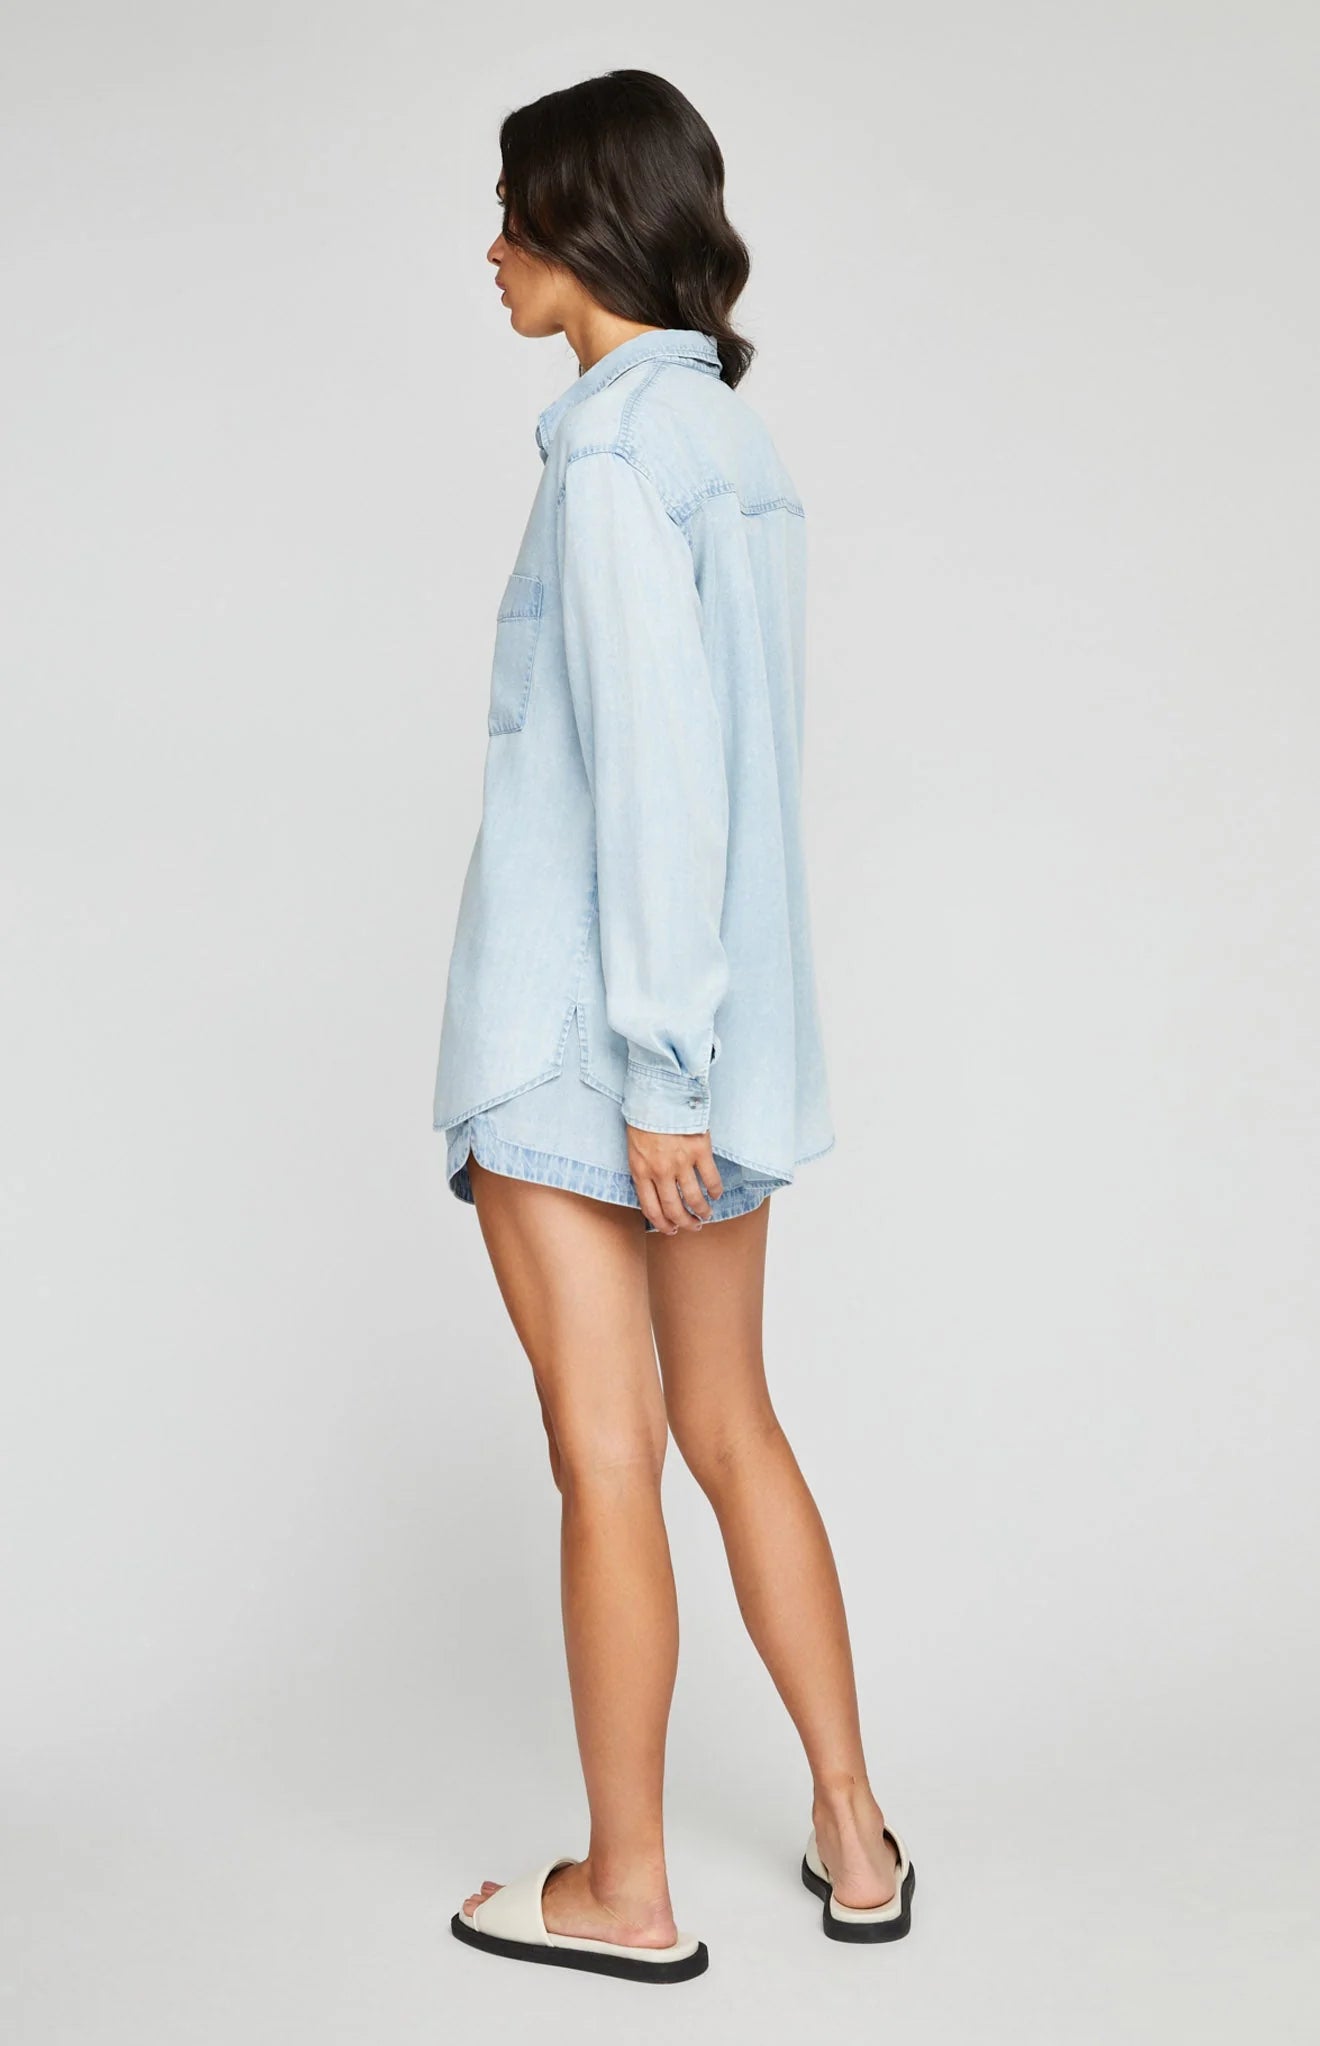 Ozzy Button Down Shirt in Light Blue